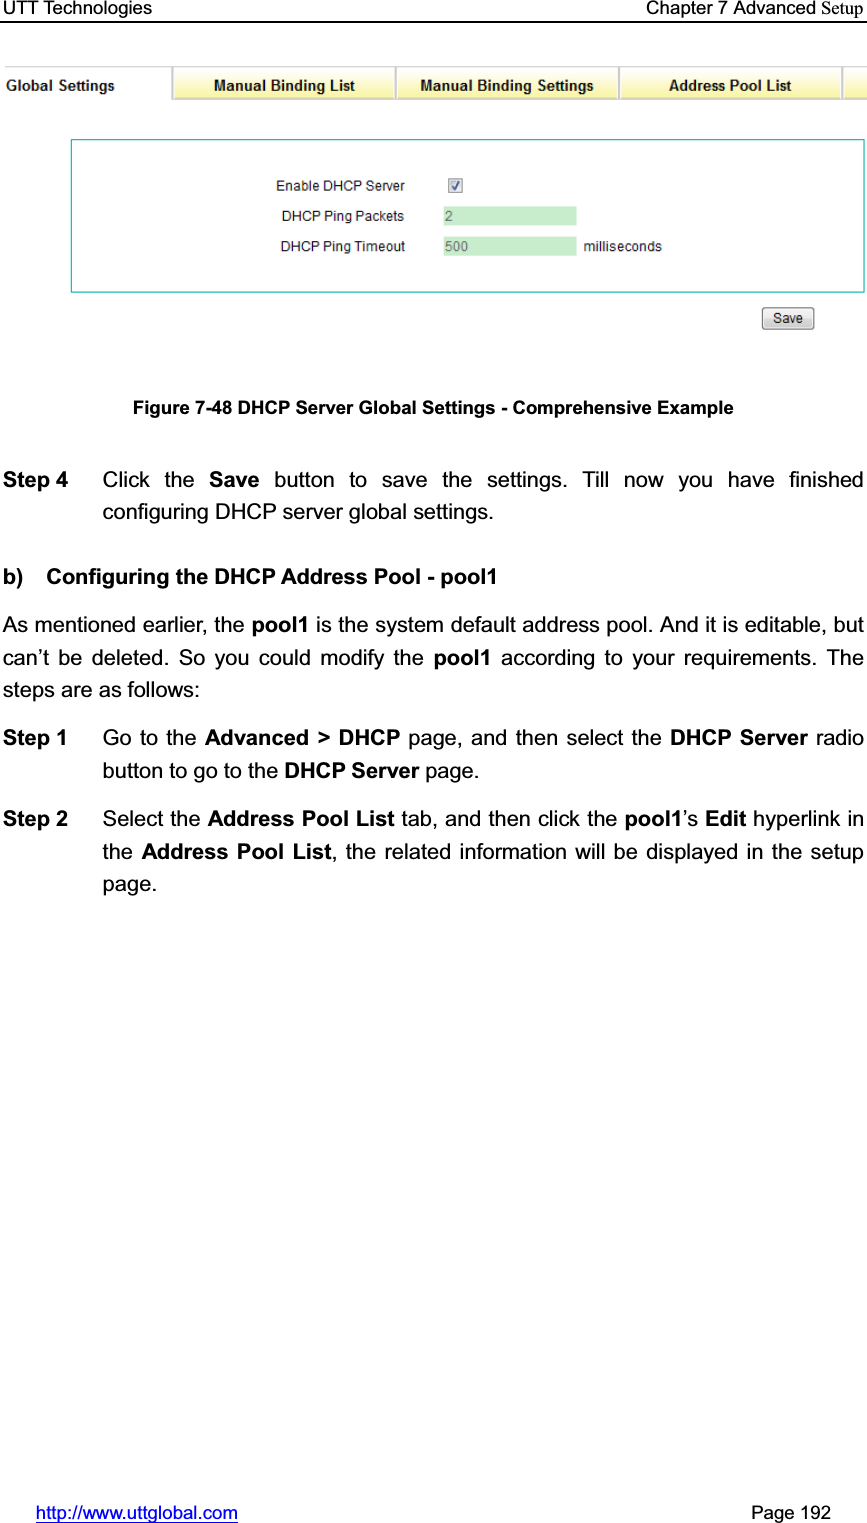 UTT Technologies    Chapter 7 Advanced Setuphttp://www.uttglobal.com                                                       Page 192 Figure 7-48 DHCP Server Global Settings - Comprehensive Example Step 4  Click the Save button to save the settings. Till now you have finished configuring DHCP server global settings. b)  Configuring the DHCP Address Pool - pool1 As mentioned earlier, the pool1 is the system default address pool. And it is editable, but can¶t be deleted. So you could modify the pool1 according to your requirements. The steps are as follows:   Step 1  Go to the Advanced &gt; DHCP page, and then select the DHCP Server radio button to go to the DHCP Server page. Step 2  Select the Address Pool List tab, and then click the pool1¶s Edit hyperlink in the Address Pool List, the related information will be displayed in the setup page. 